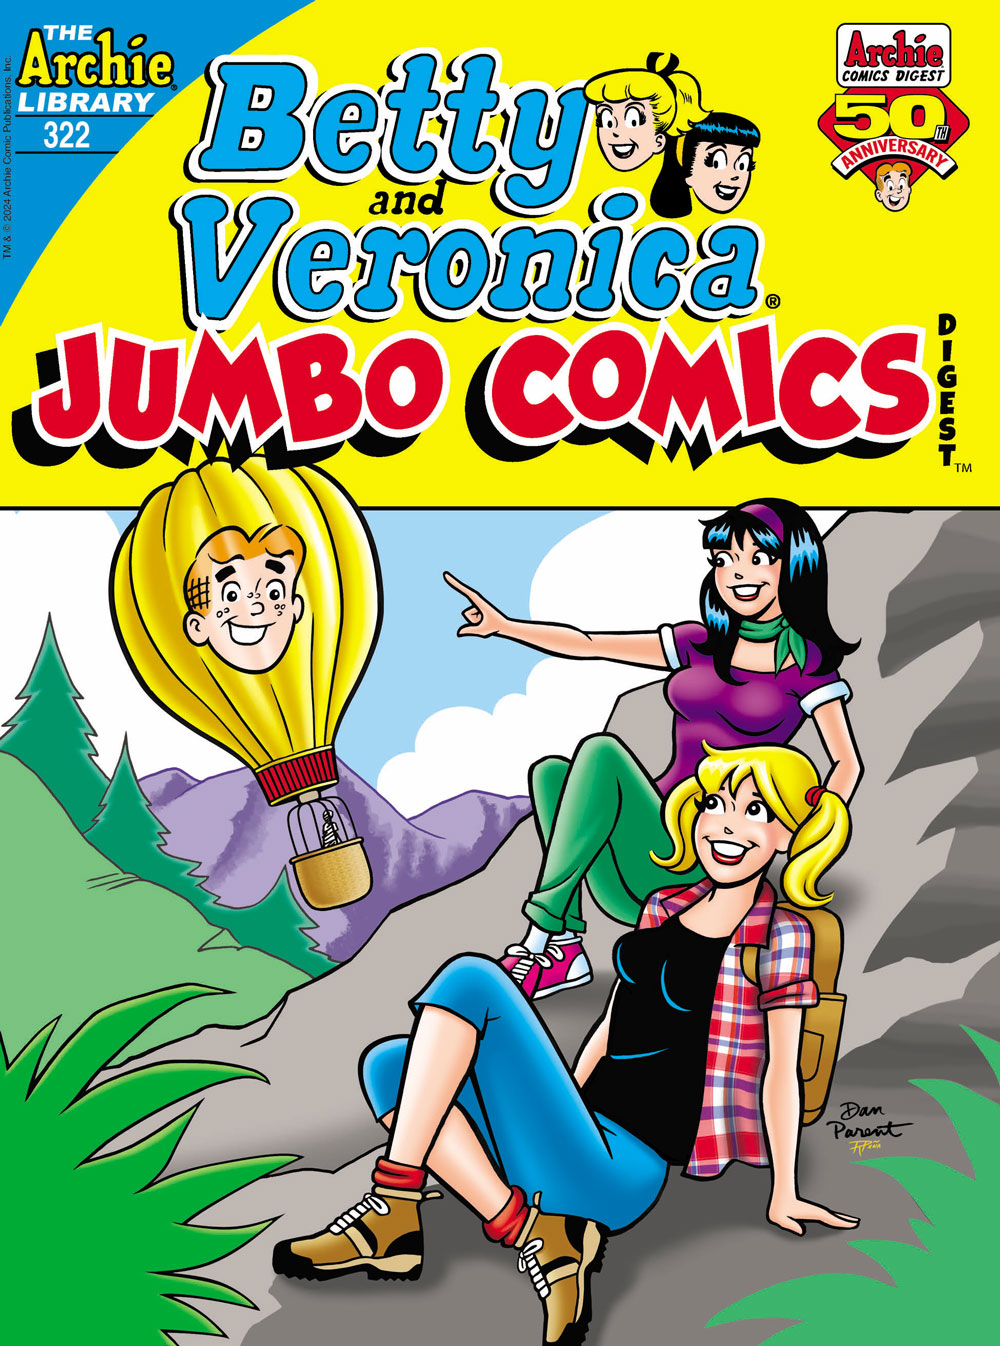 Cover of BETTY AND VERONICA JUMBO COMICS DIGEST #322. Betty and Veronica sit on a rock in the forest pointing at a hot air balloon with Archie's face emblazoned on the side.